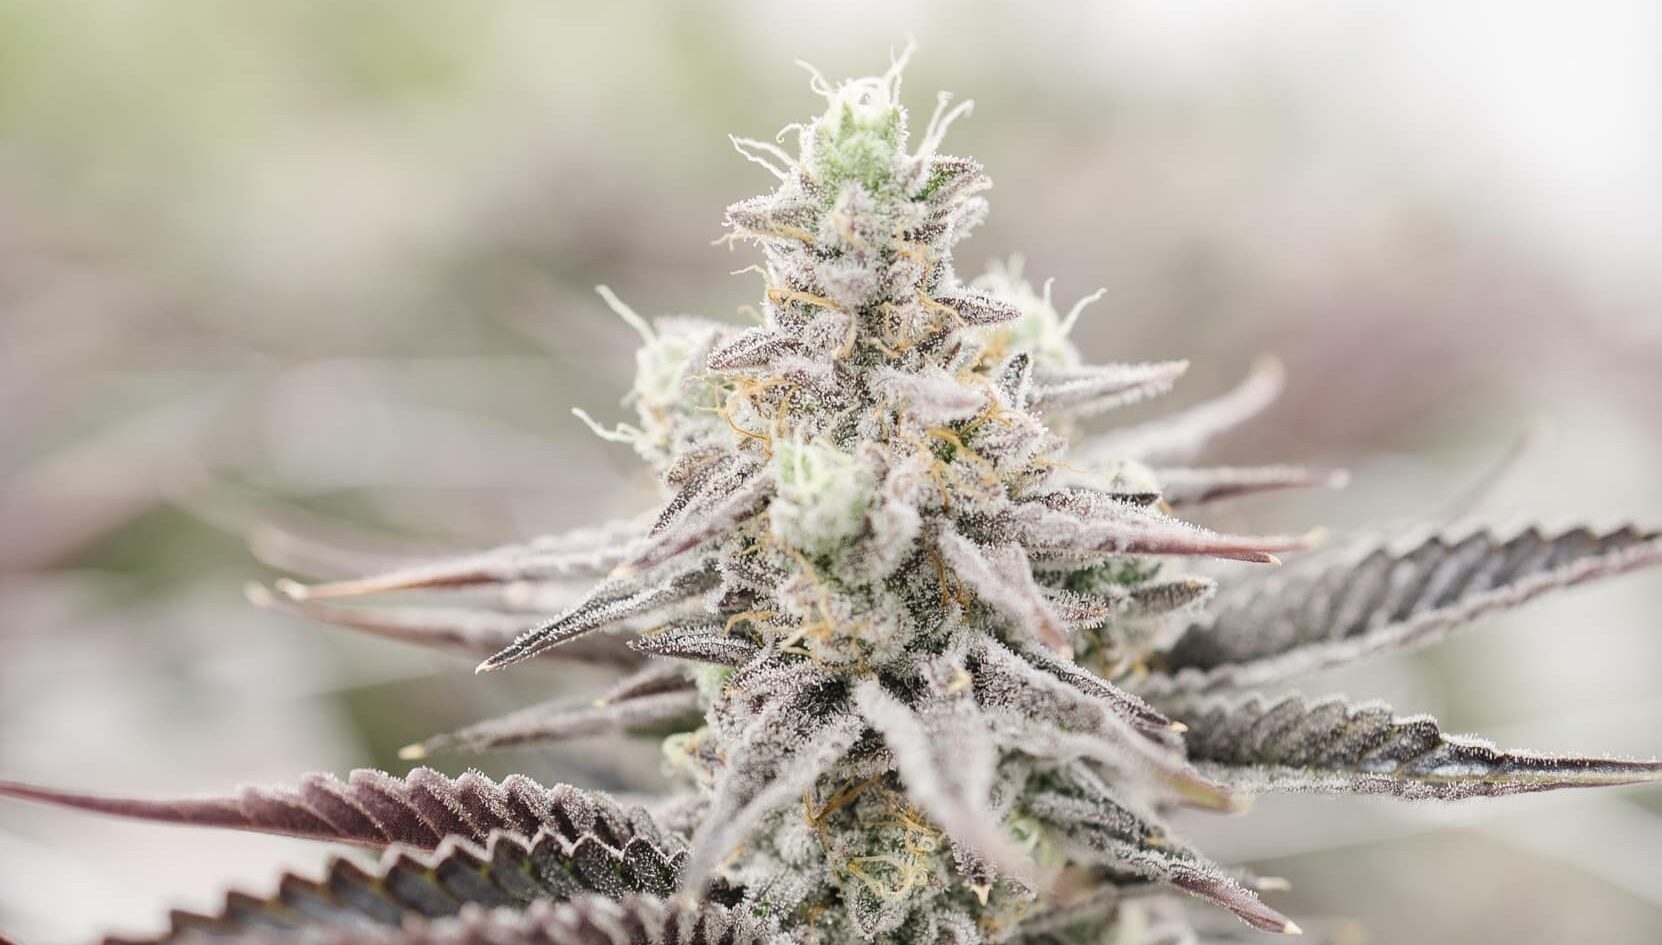 Dirty Bird is an Hybrid Cannabis strain grown by Central Harvest in Week 12 of Flowering.